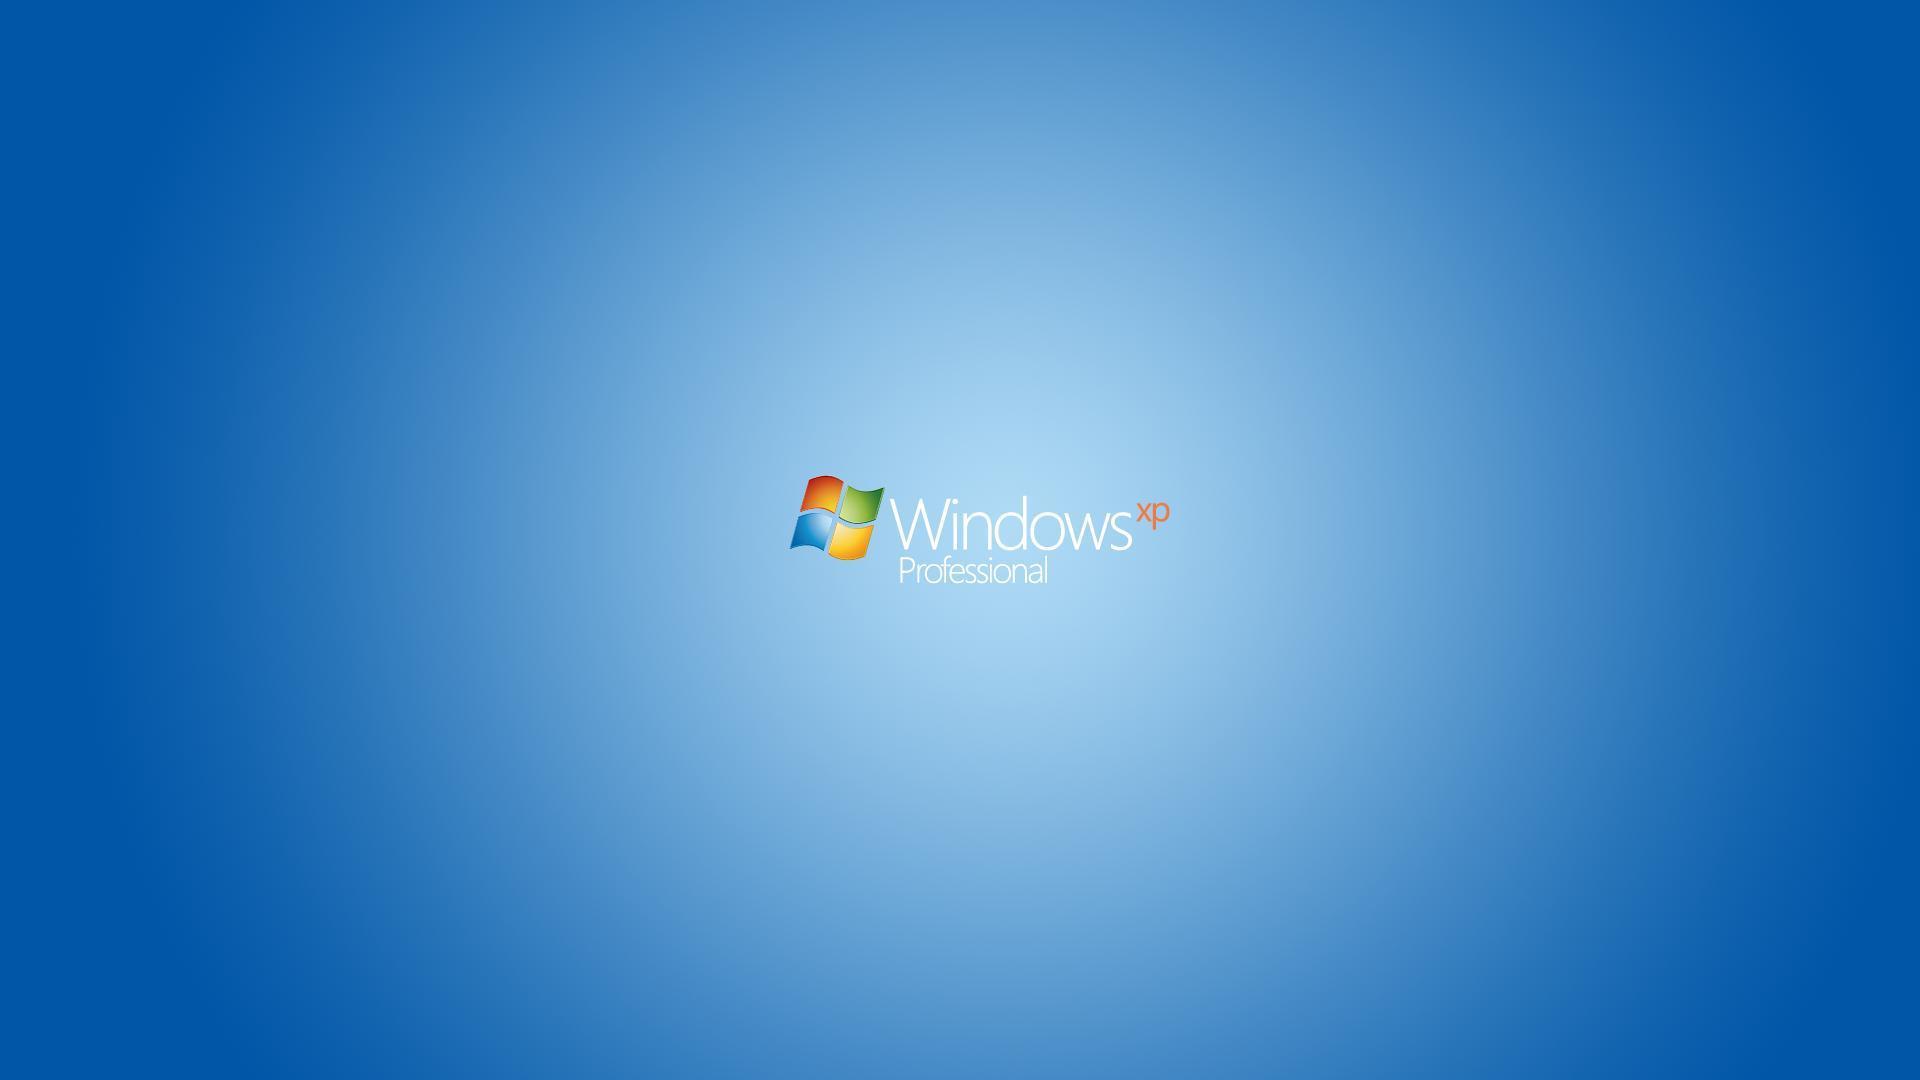 Windows XP Professional Wallpapers by Scimiazzurro